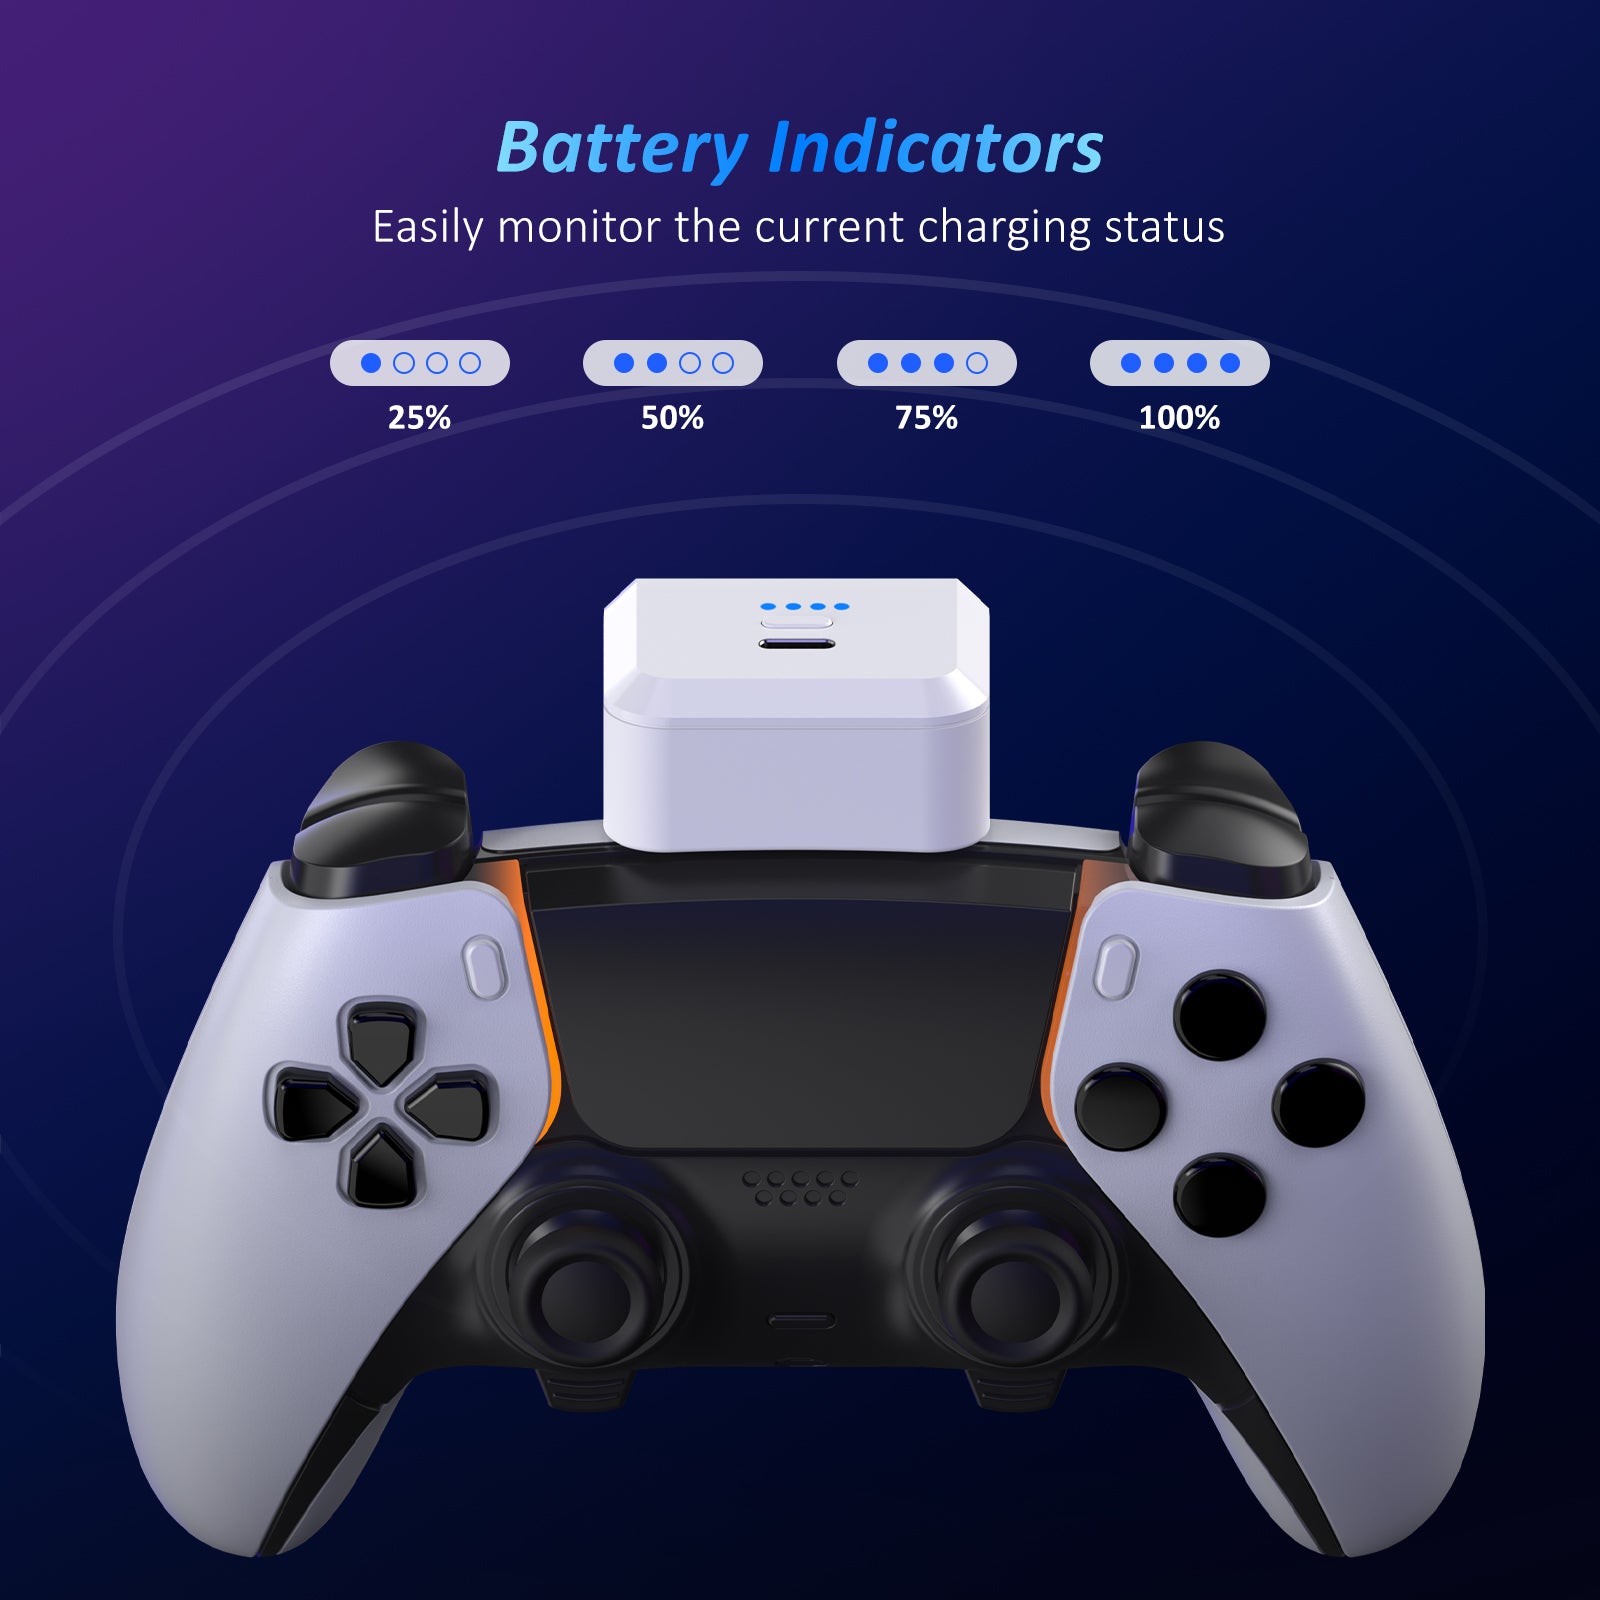 The battery pack features a blue indicator light, allowing for clear visibility of the remaining battery capacity.